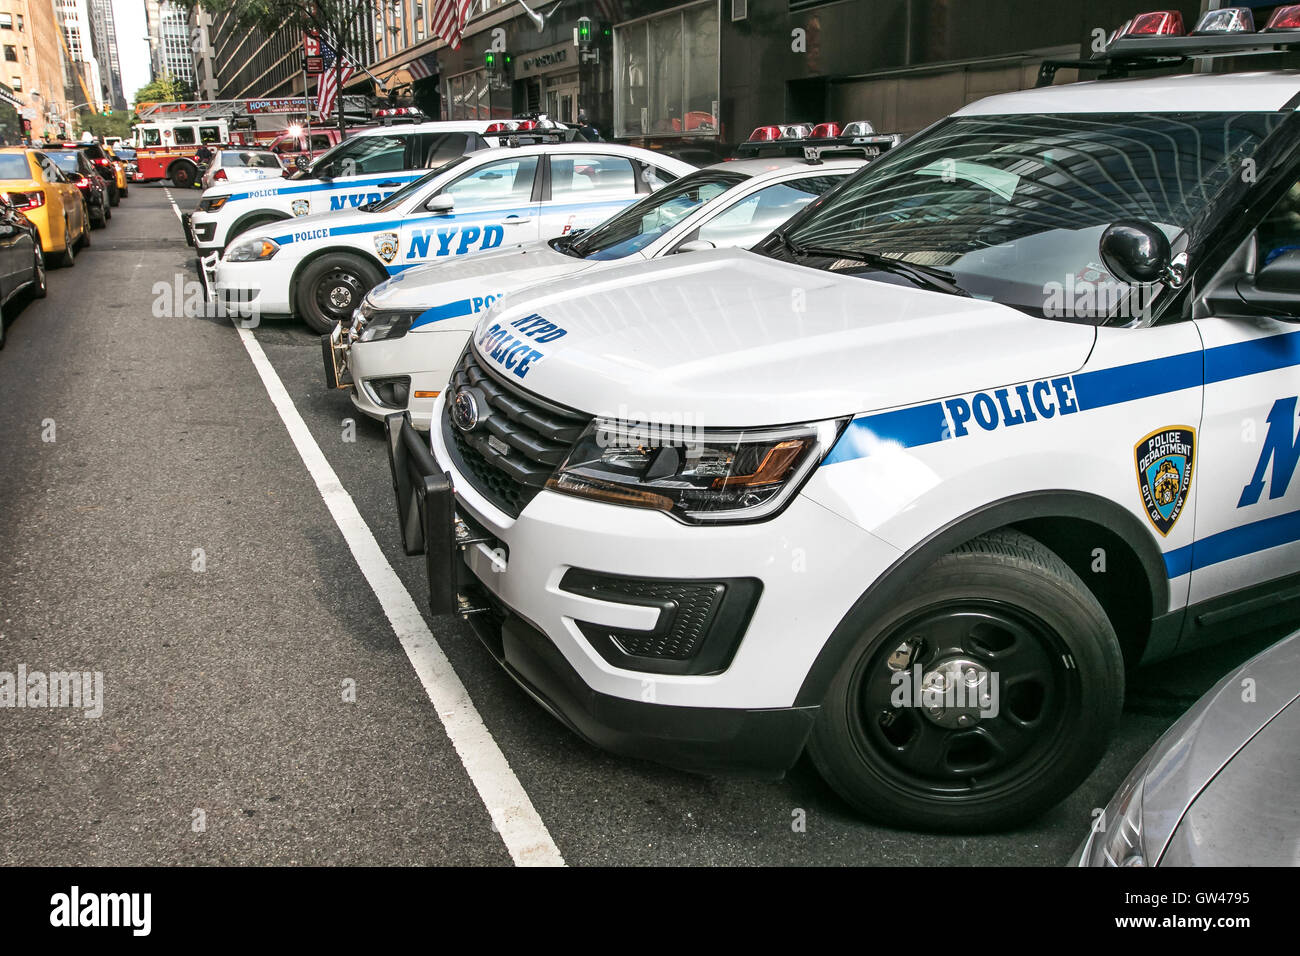 Police cars parked near a precinct in New York City. A fire truck is coming out on the street in the background. Stock Photo